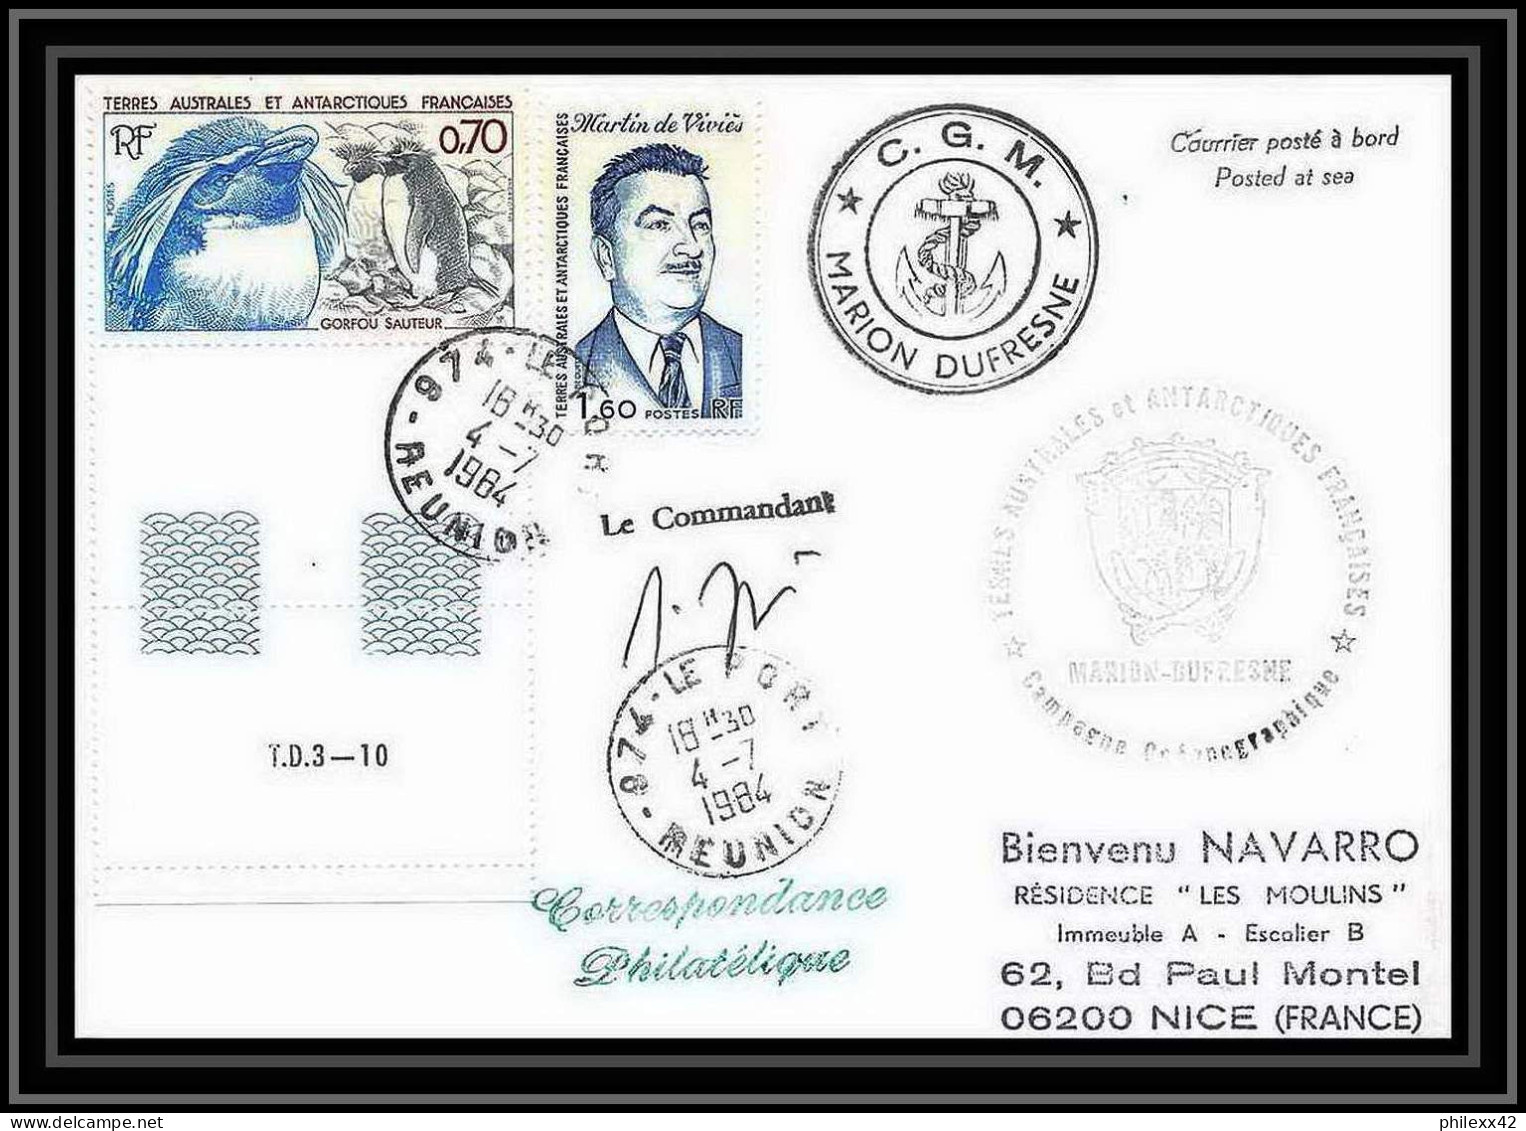 1456 Campagne Md 40 Macamo Marion Dufresne 4/7/1984 Signé Signed TAAF Antarctic Terres Australes Lettre (cover) - Spedizioni Antartiche